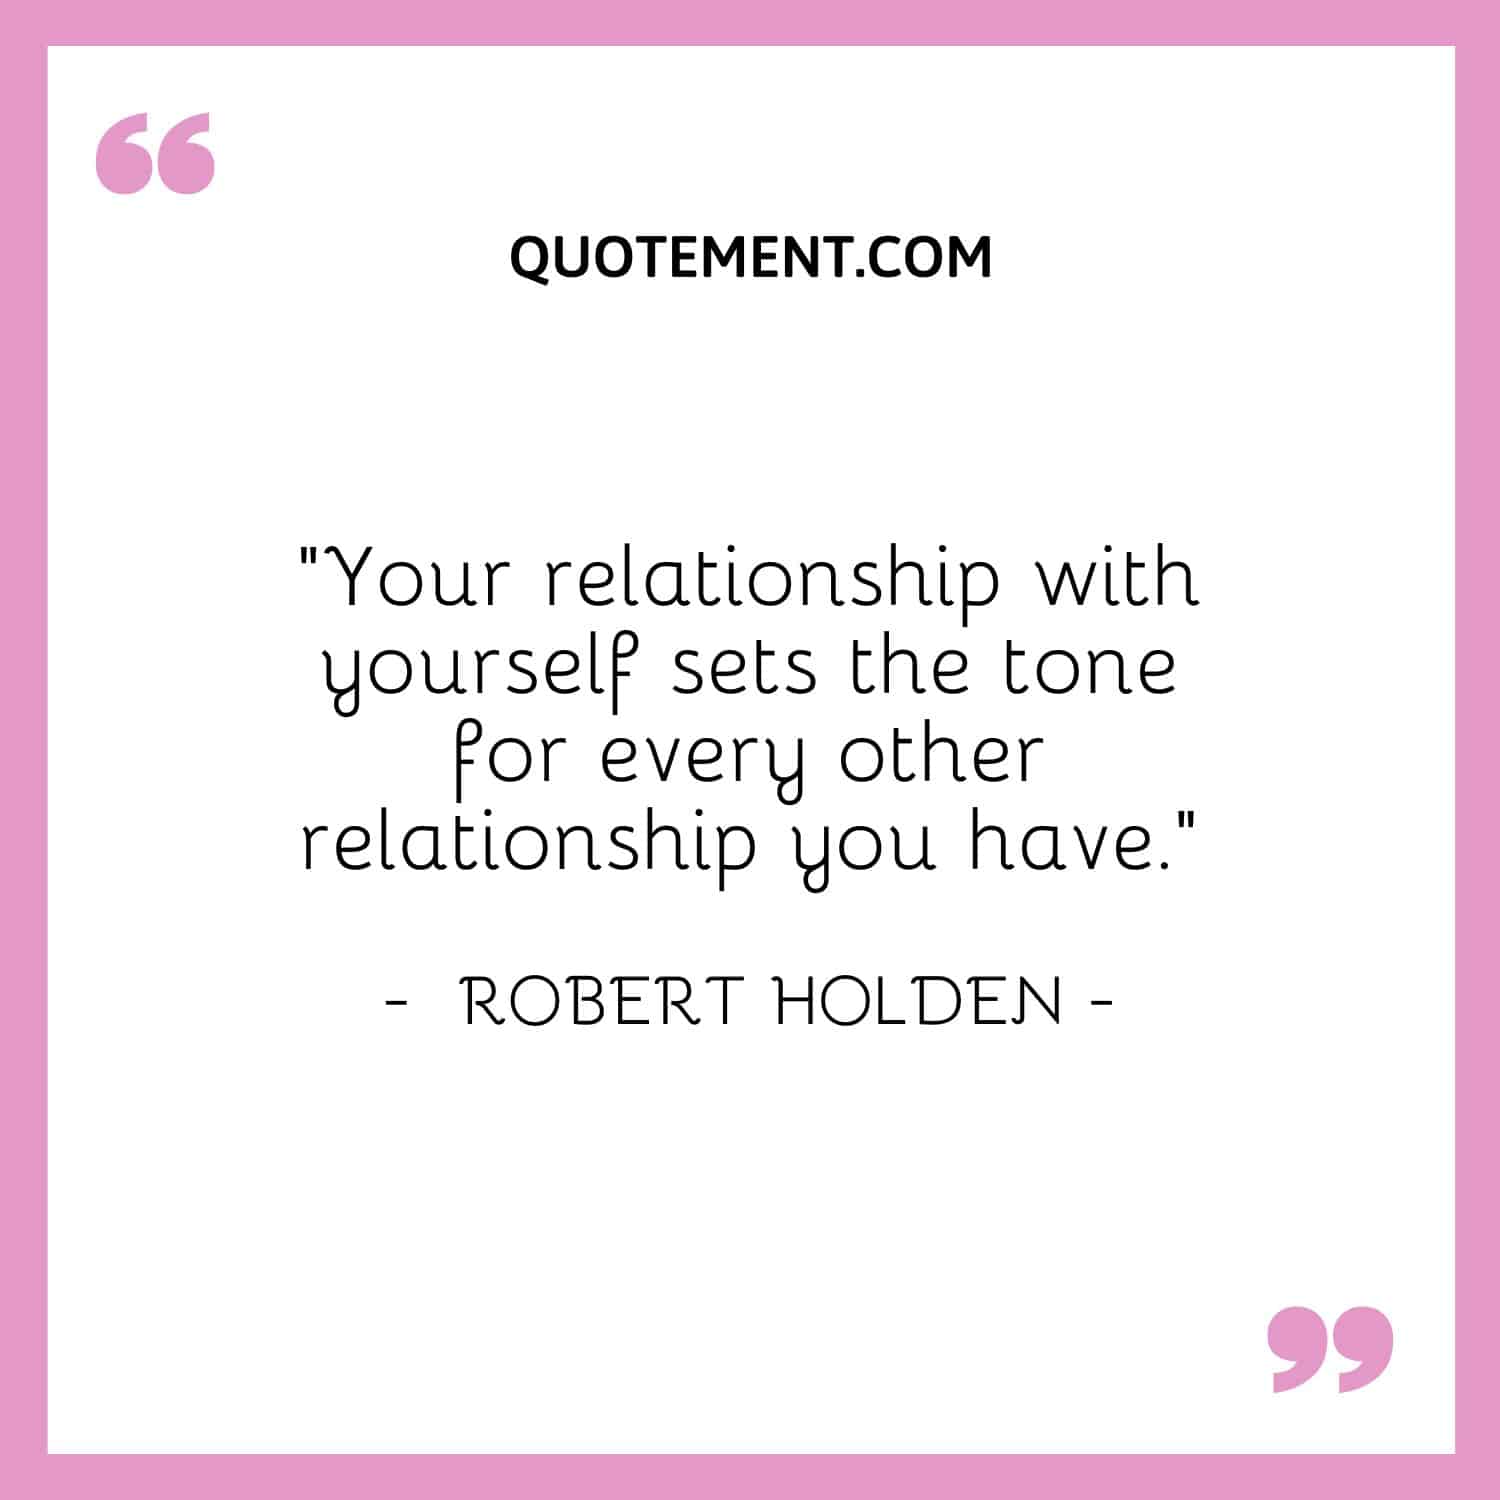 Your relationship with yourself sets the tone for every other relationship you have